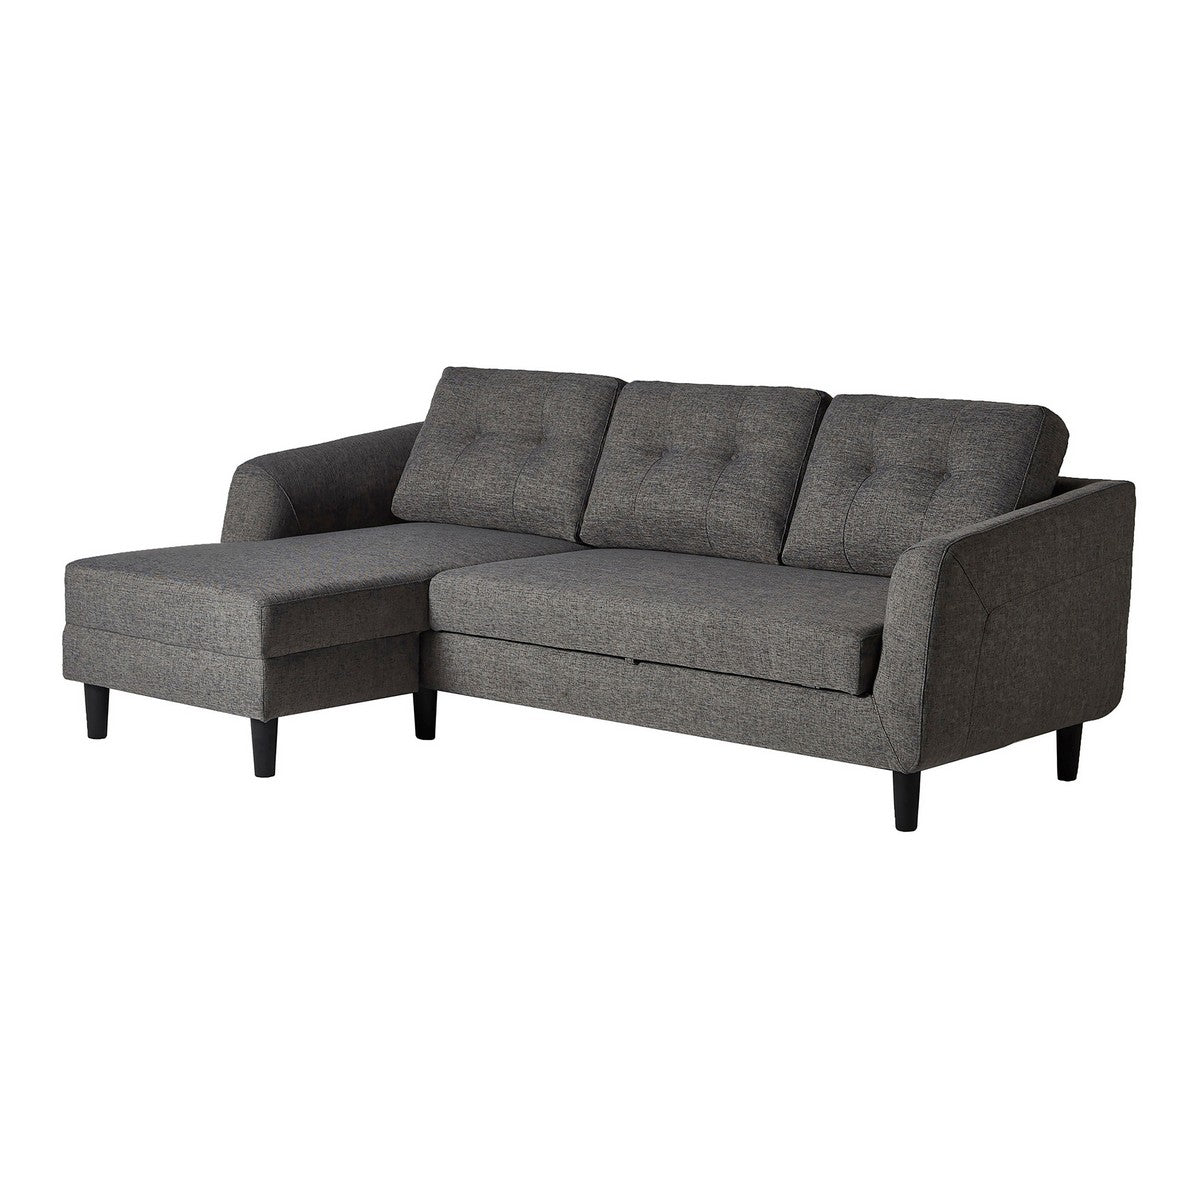 Moe's Home Collection Belagio Sofa Bed With Chaise Charcoal Left - MT-1019-07-L - Moe's Home Collection - Sofa Beds - Minimal And Modern - 1